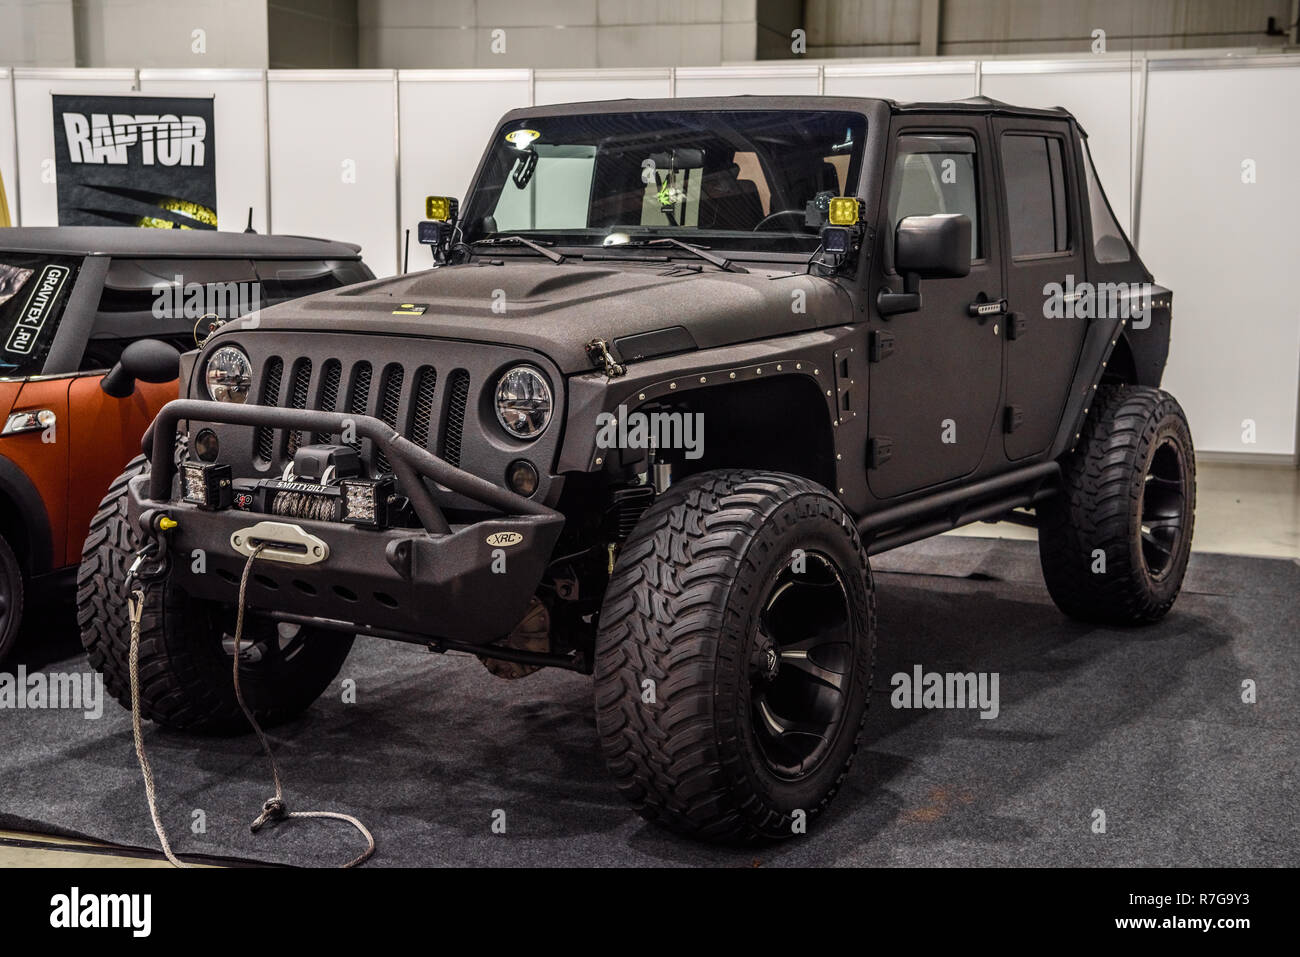 https://c8.alamy.com/comp/R7G9Y3/moscow-aug-2016-jeep-wrangler-jk-presented-at-mias-moscow-international-automobile-salon-on-august-20-2016-in-moscow-russia-R7G9Y3.jpg